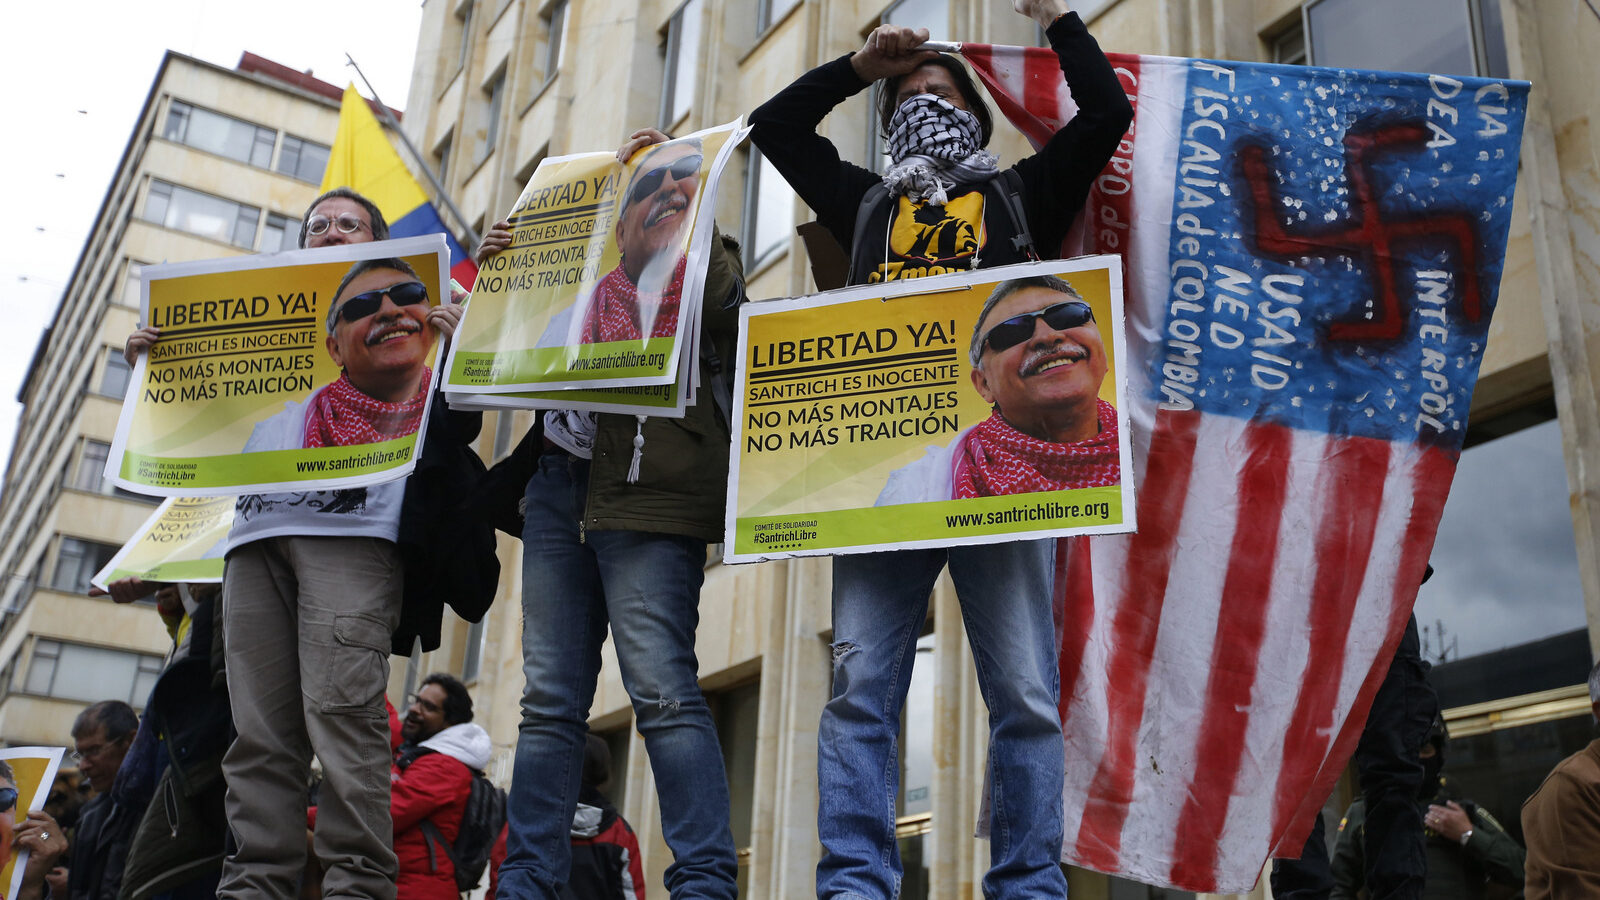 Supporters of Seuxis Paucias Hernandez-Solarte, better known by his alias Jesus Santrich, a leader of the former Revolutionary Armed Forces of Colombia (FARC), hold posters asking for his freedom during a demonstration marking May Day to honor workers, in Bogota, Colombia, May, 1, 2018. (AP/Fernando Vergara)